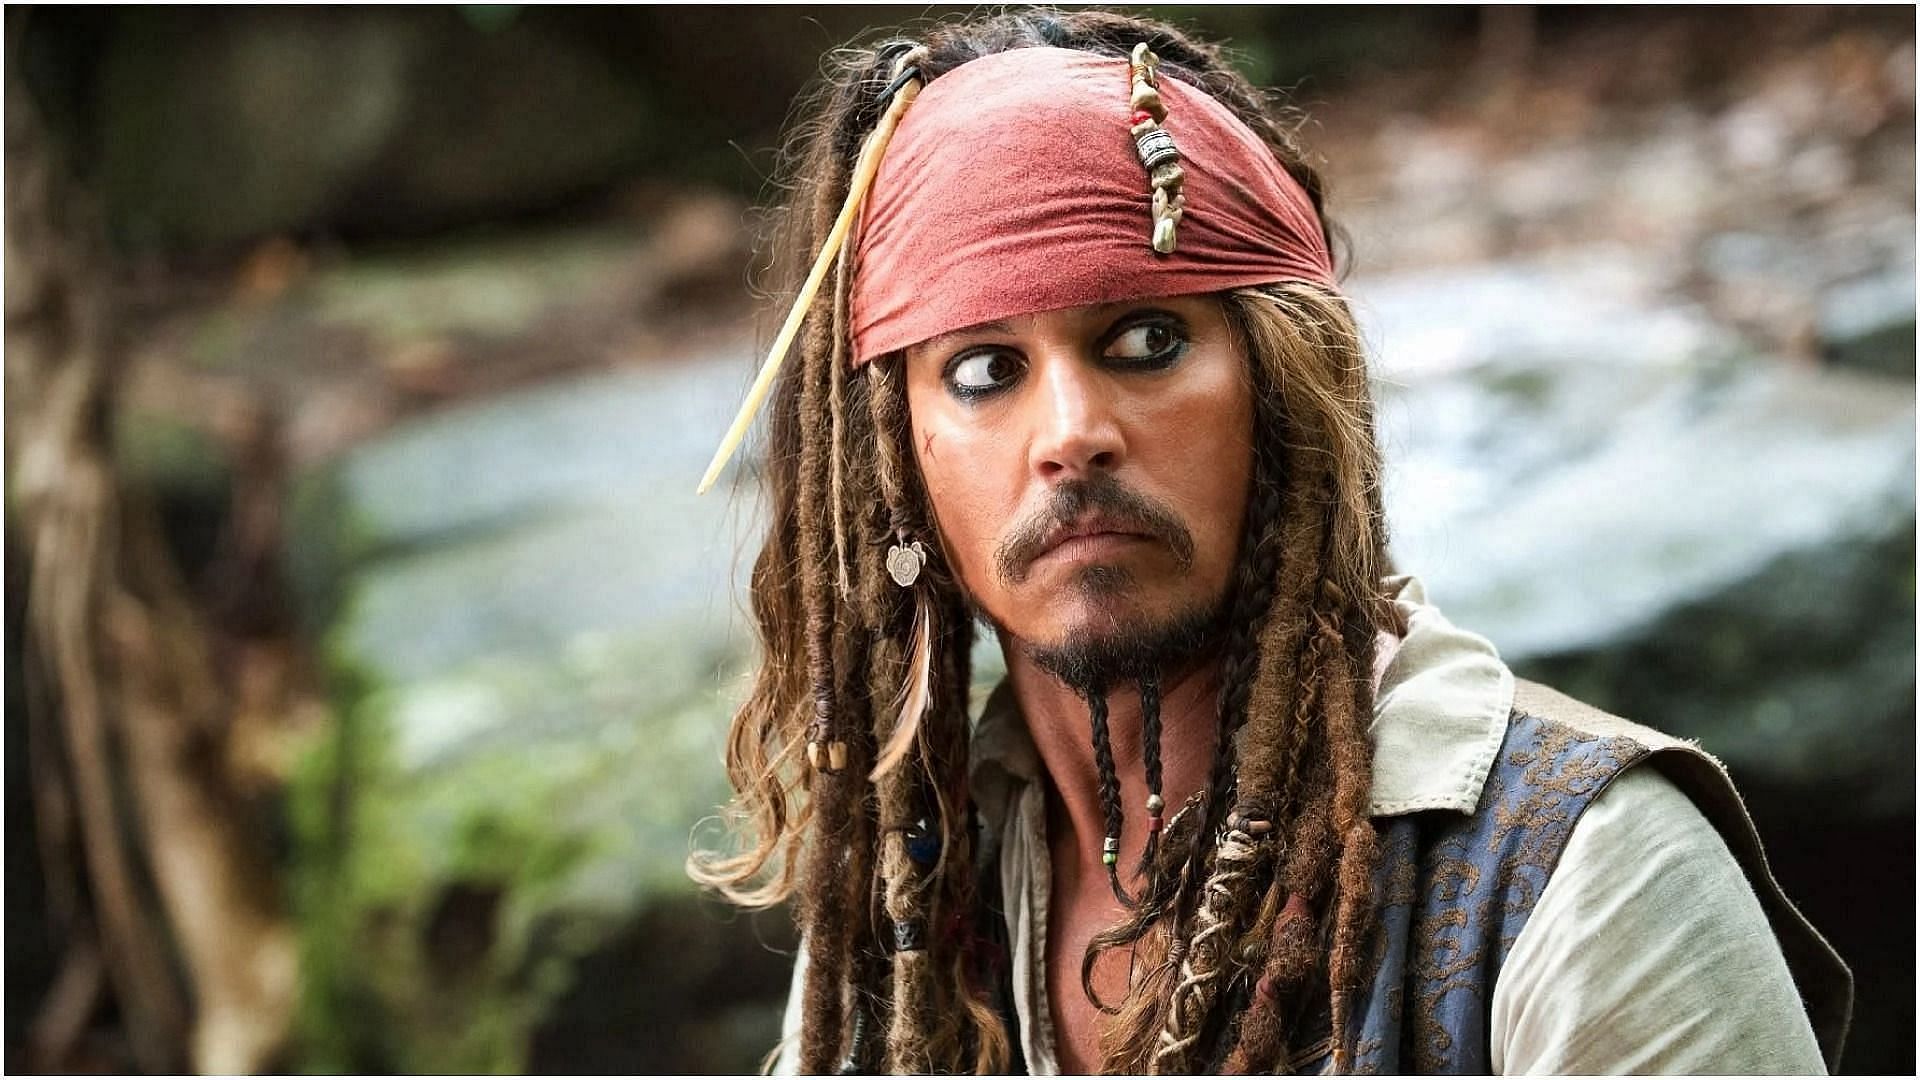 Johnny Depp&rsquo;s rep confirms that the actor will not be returning to the Pirates franchise (Image via The Walt Disney Company)